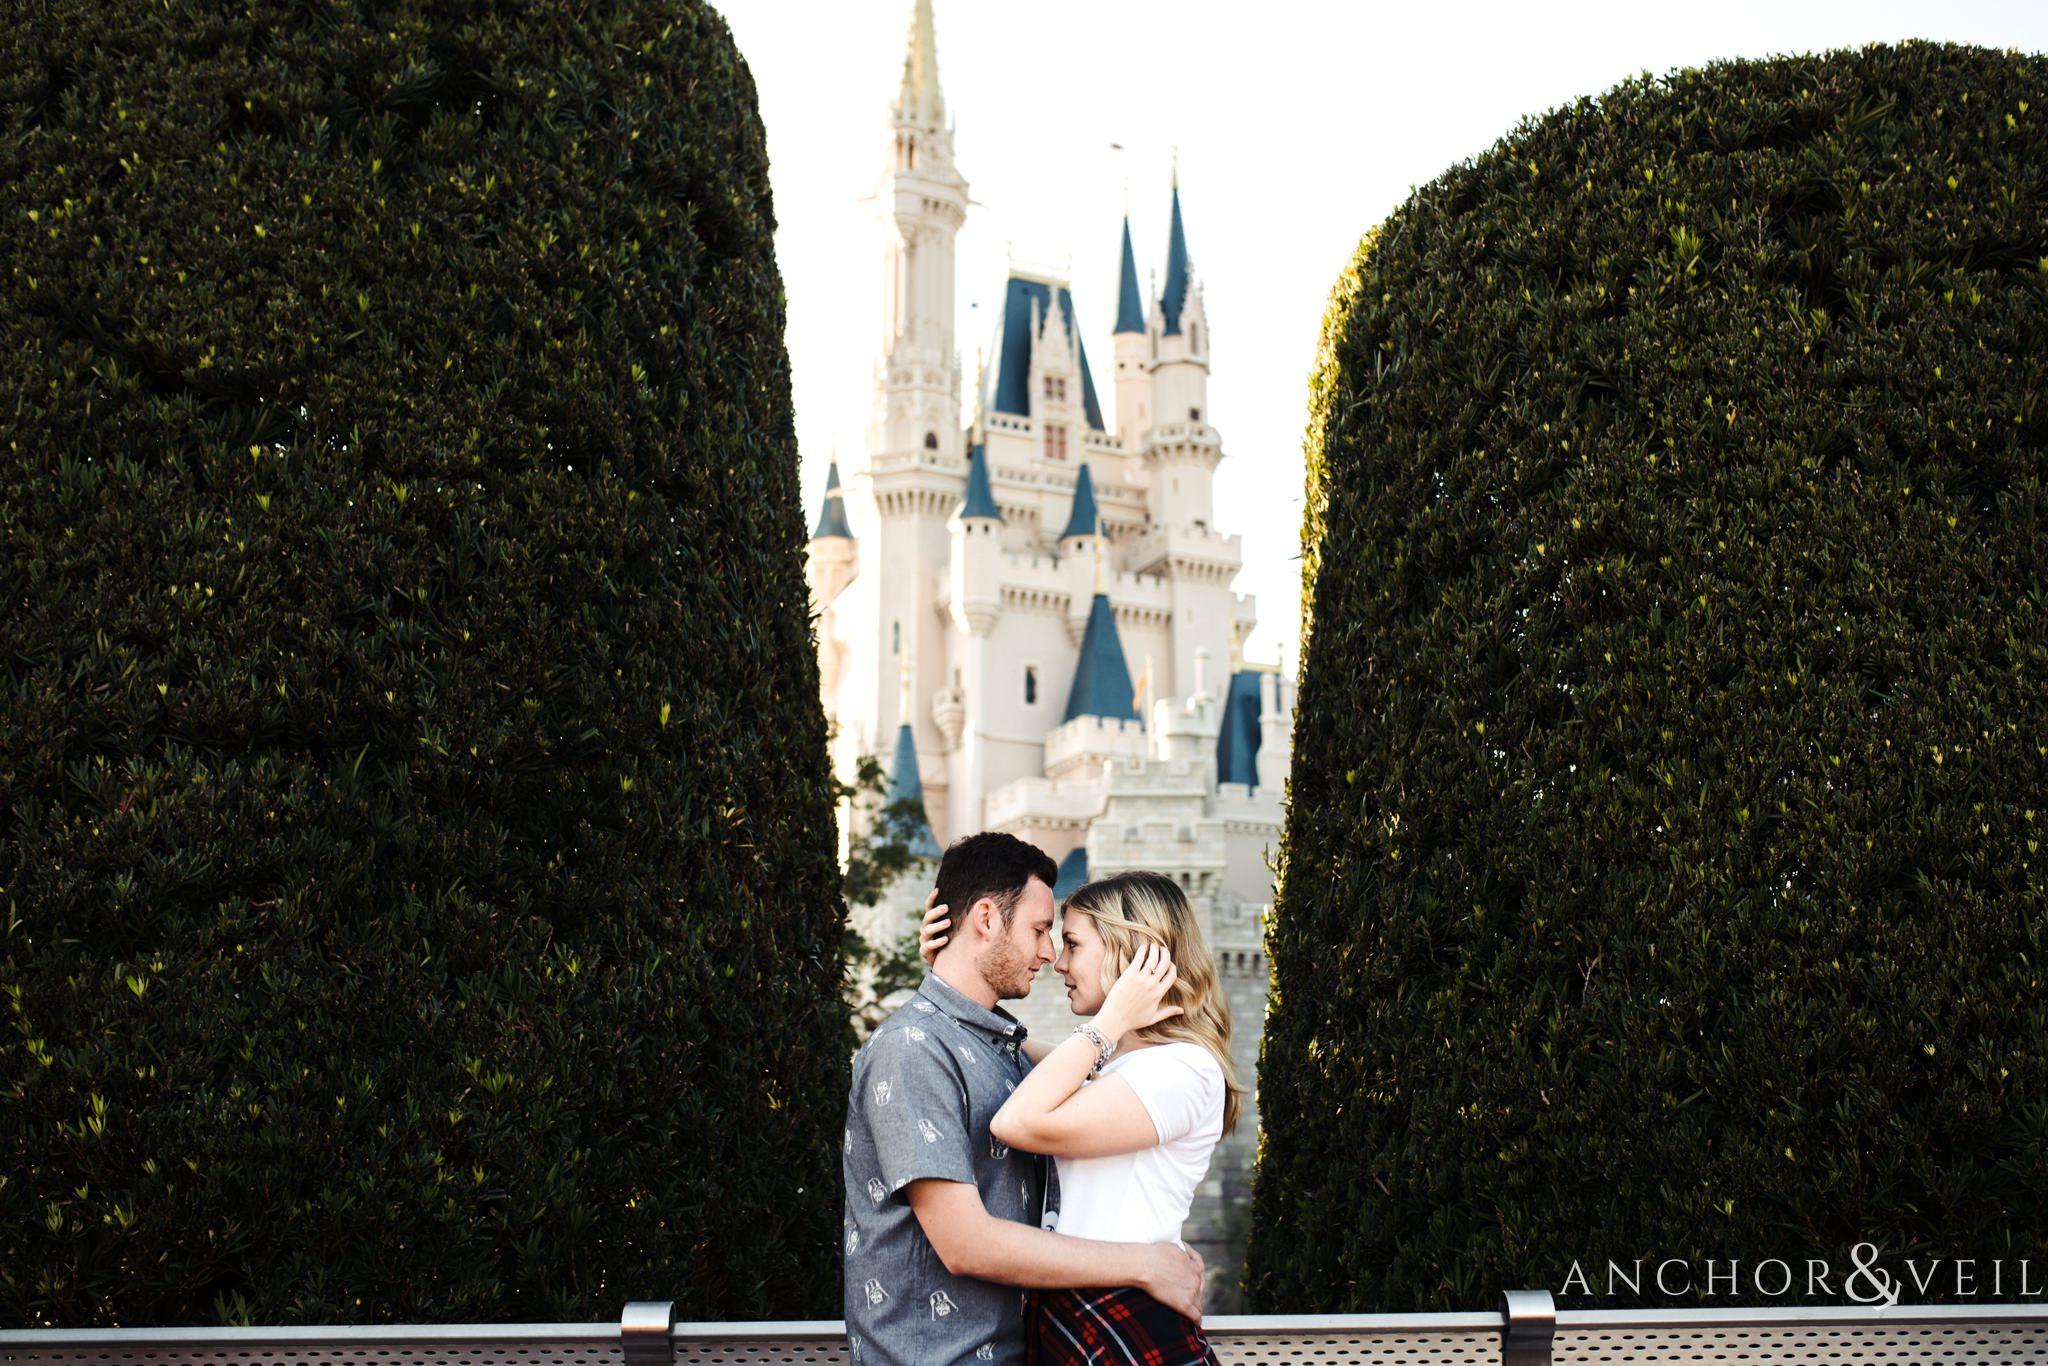 moving her hair in between the trees with the castle during their Disney world engagement session at Disney's Magic Kingdom